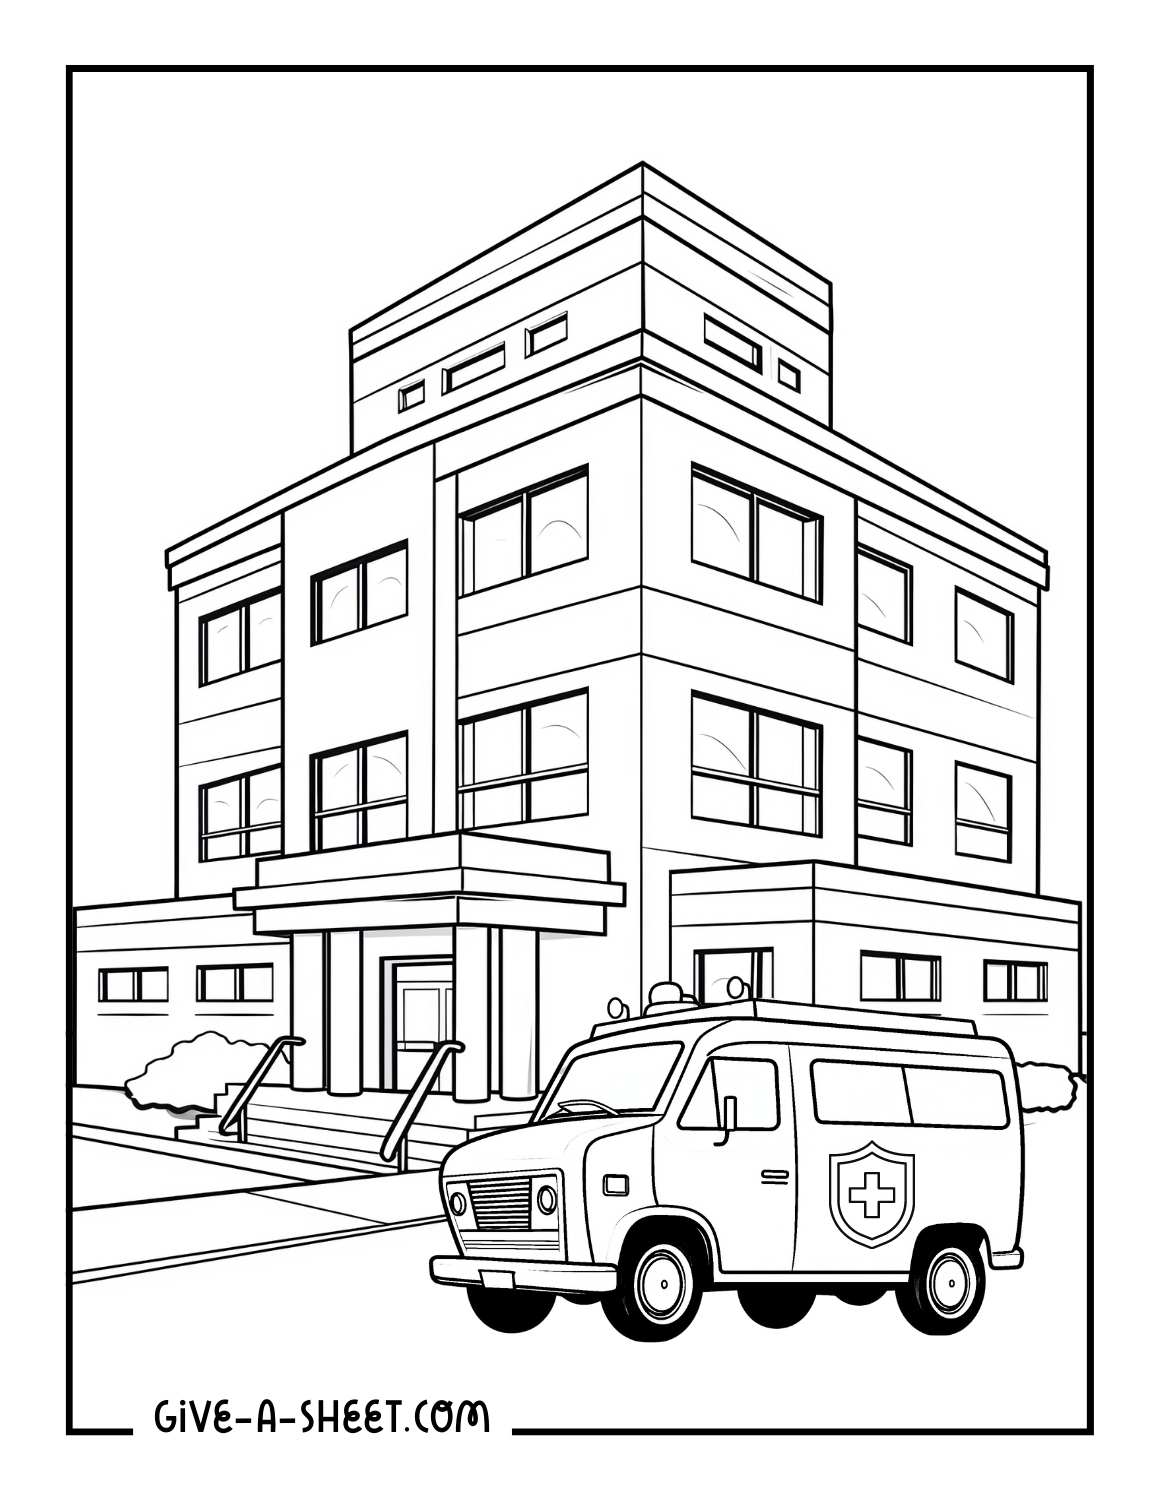 An ambulance outside the hospital coloring page.